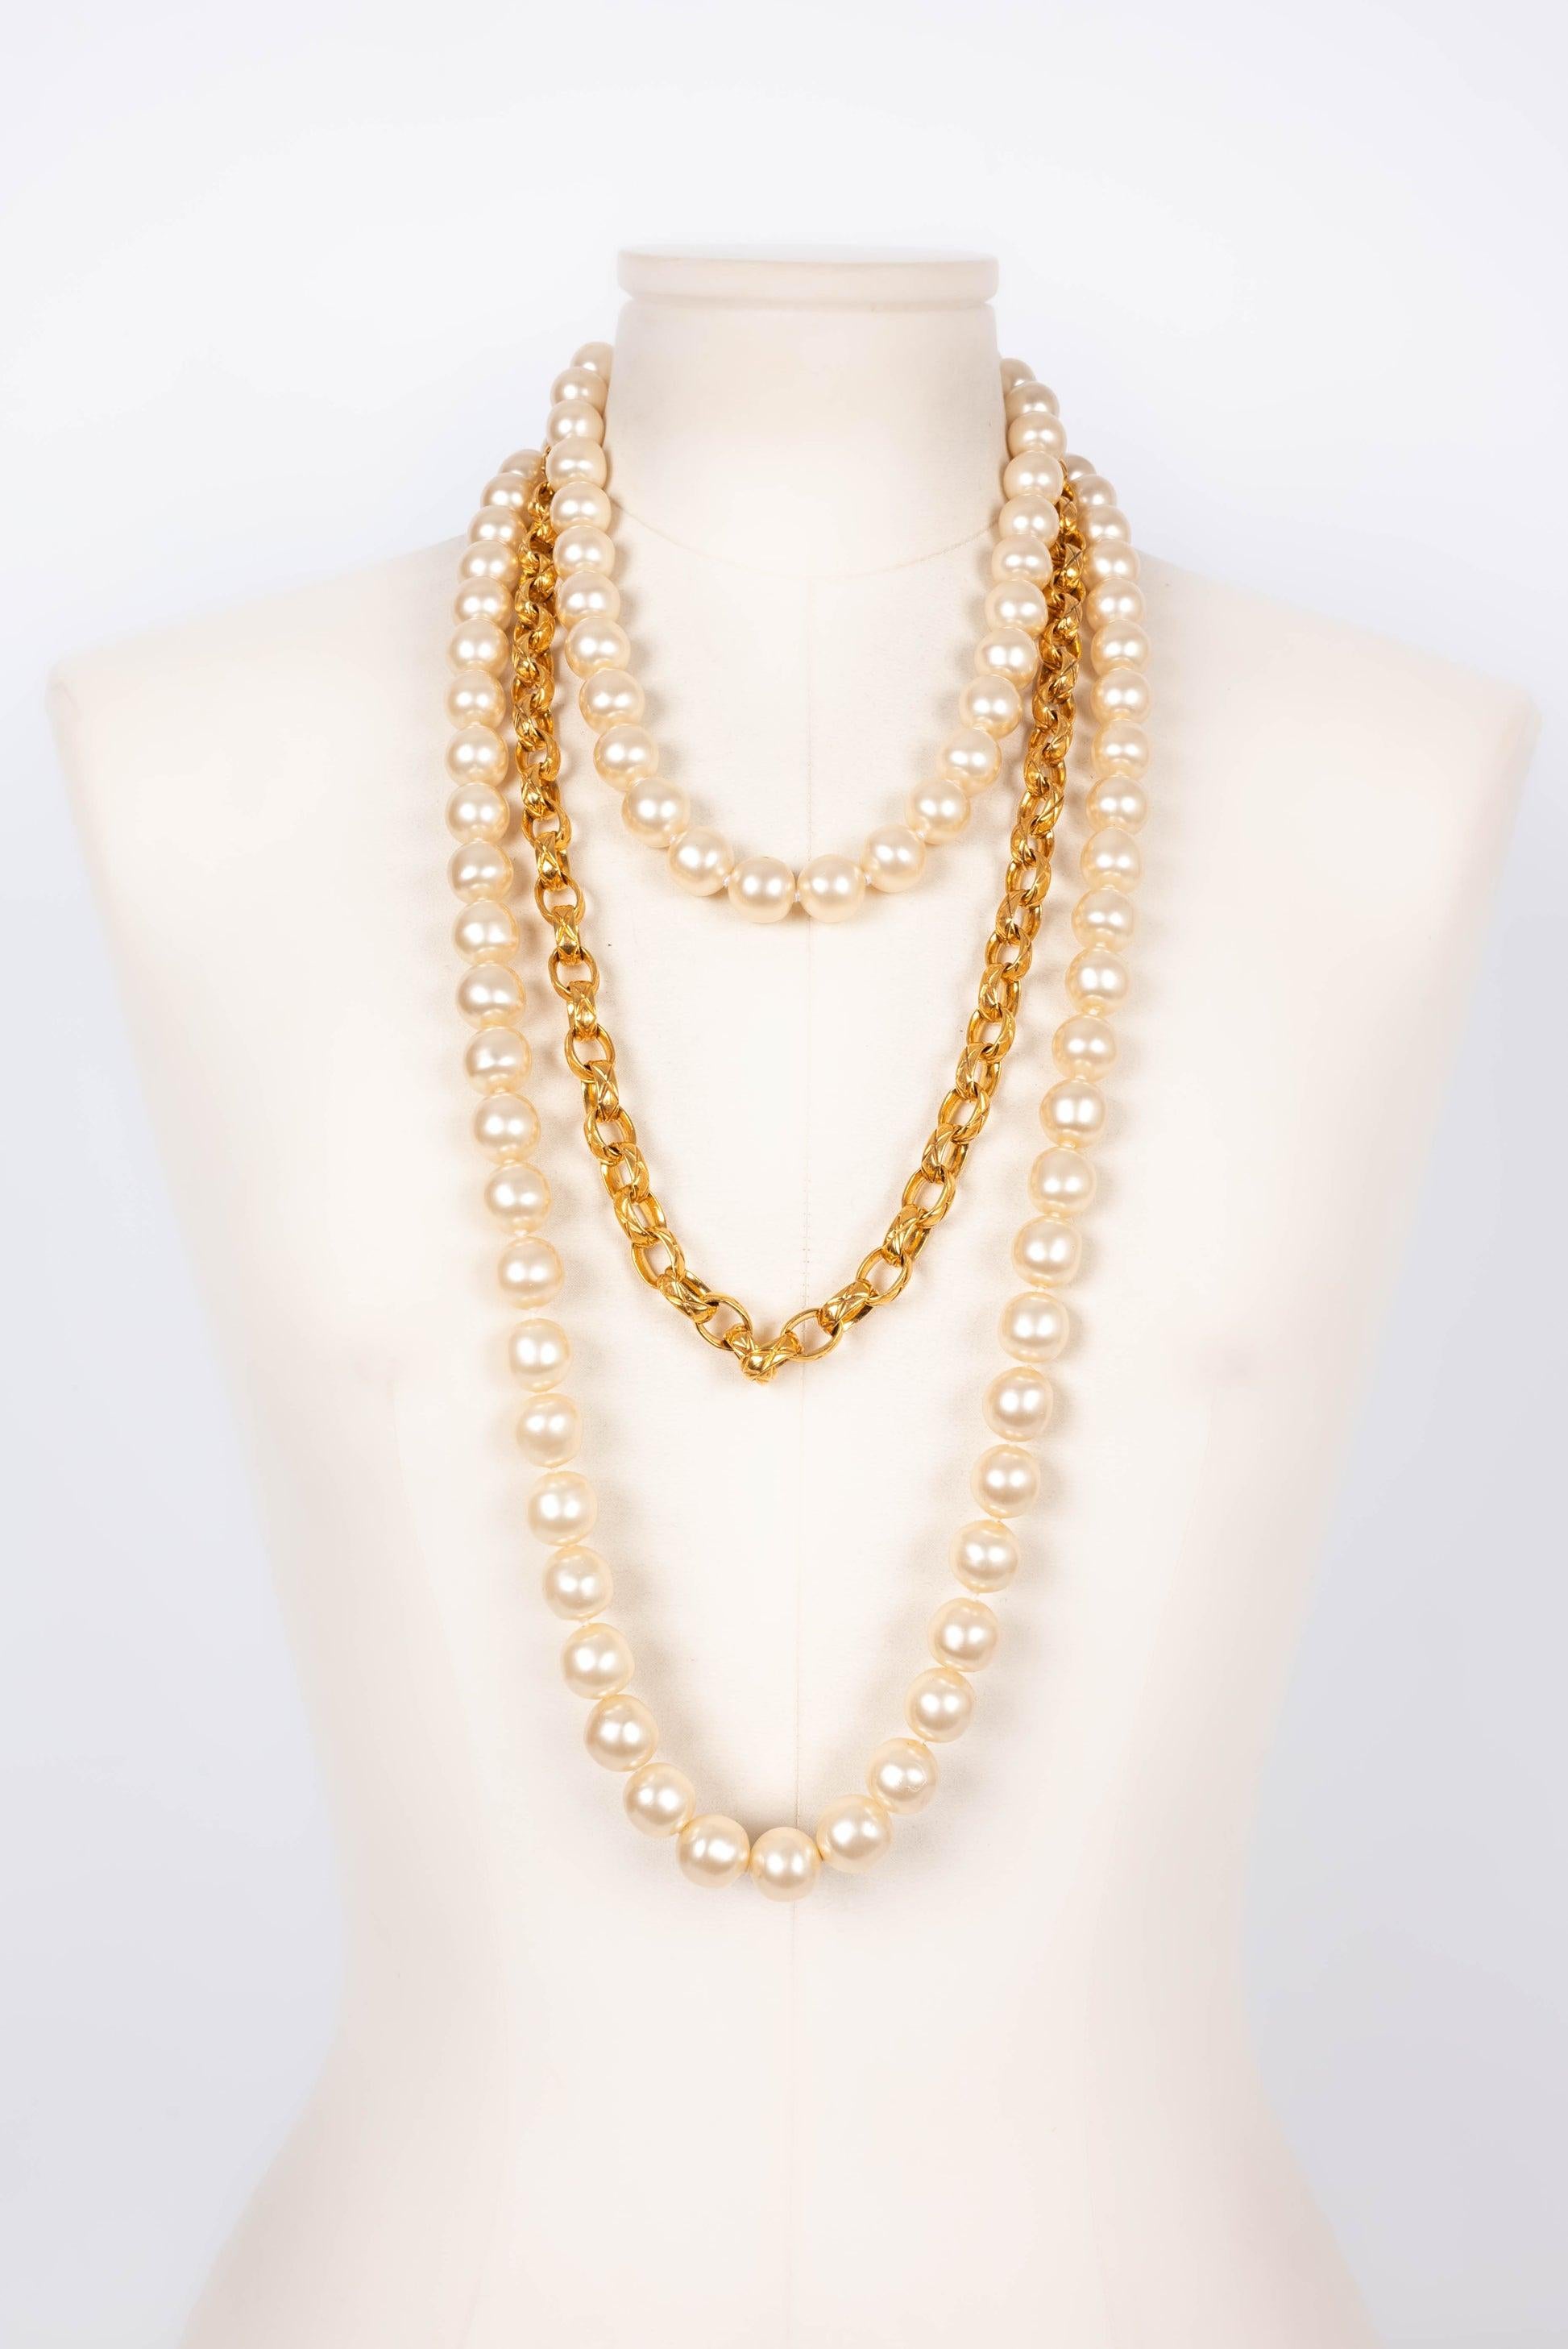 Chanel Necklace in Gold-Plated Metal and Costume Pearly Beads, 1990s For Sale 3